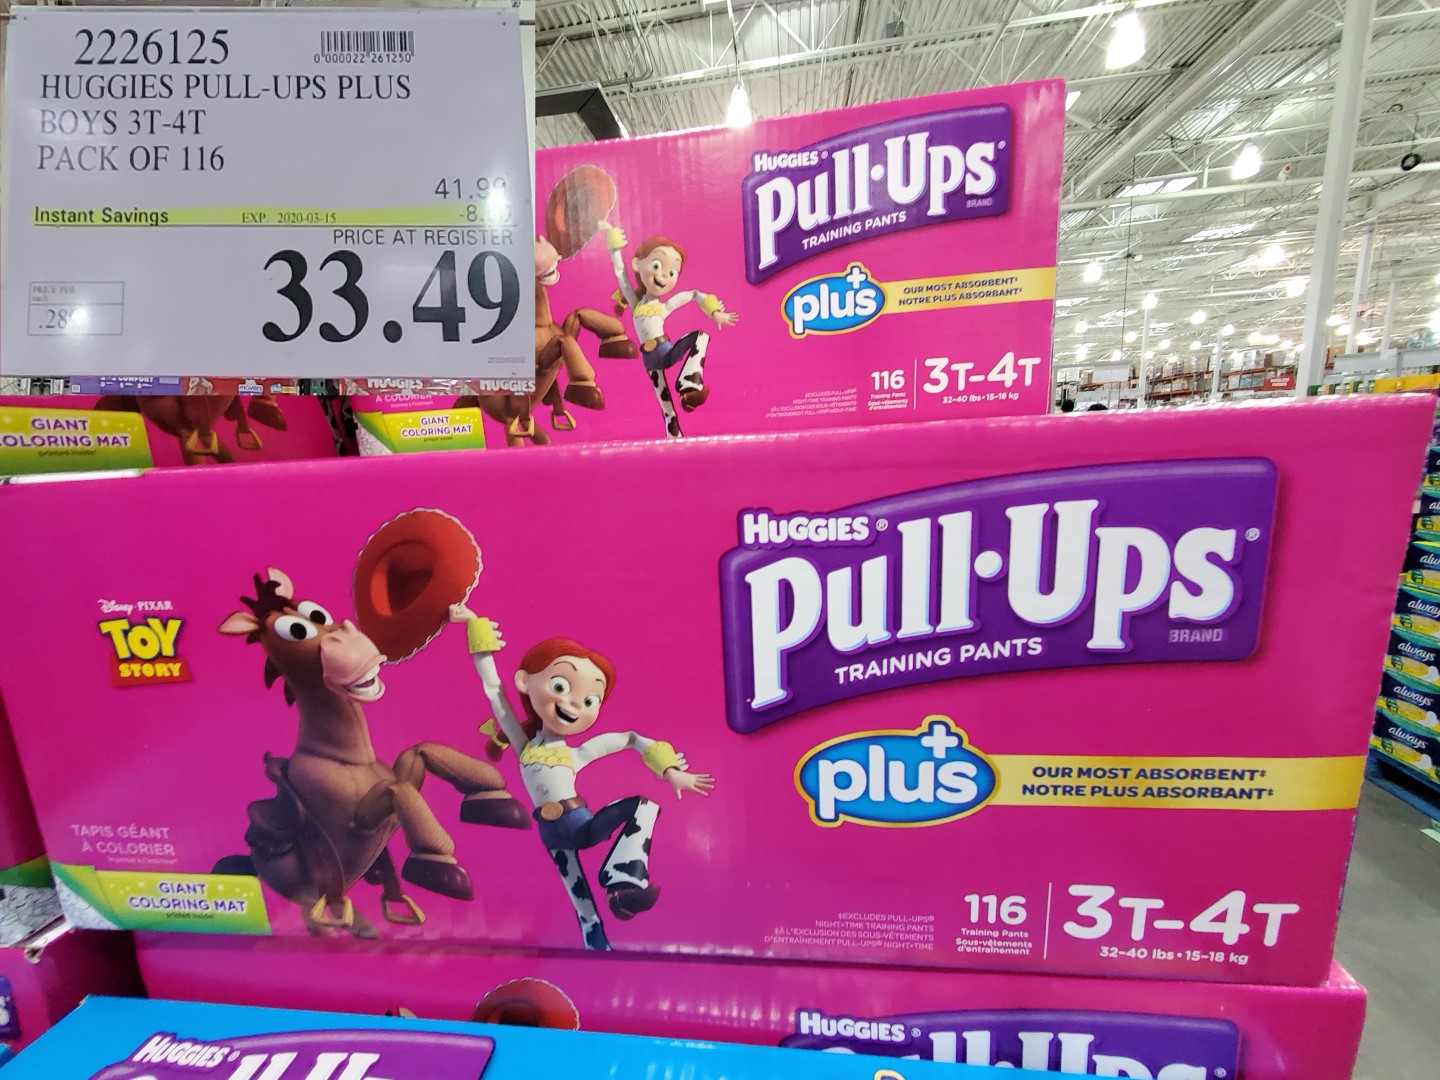 2226125 HUGGIES PULL UPS PLUS BOYS 3T 4T PACK OF 116 10 00 INSTANT SAVINGS  EXPIRES ON 2022 09 25 37 99 - Costco East Fan Blog